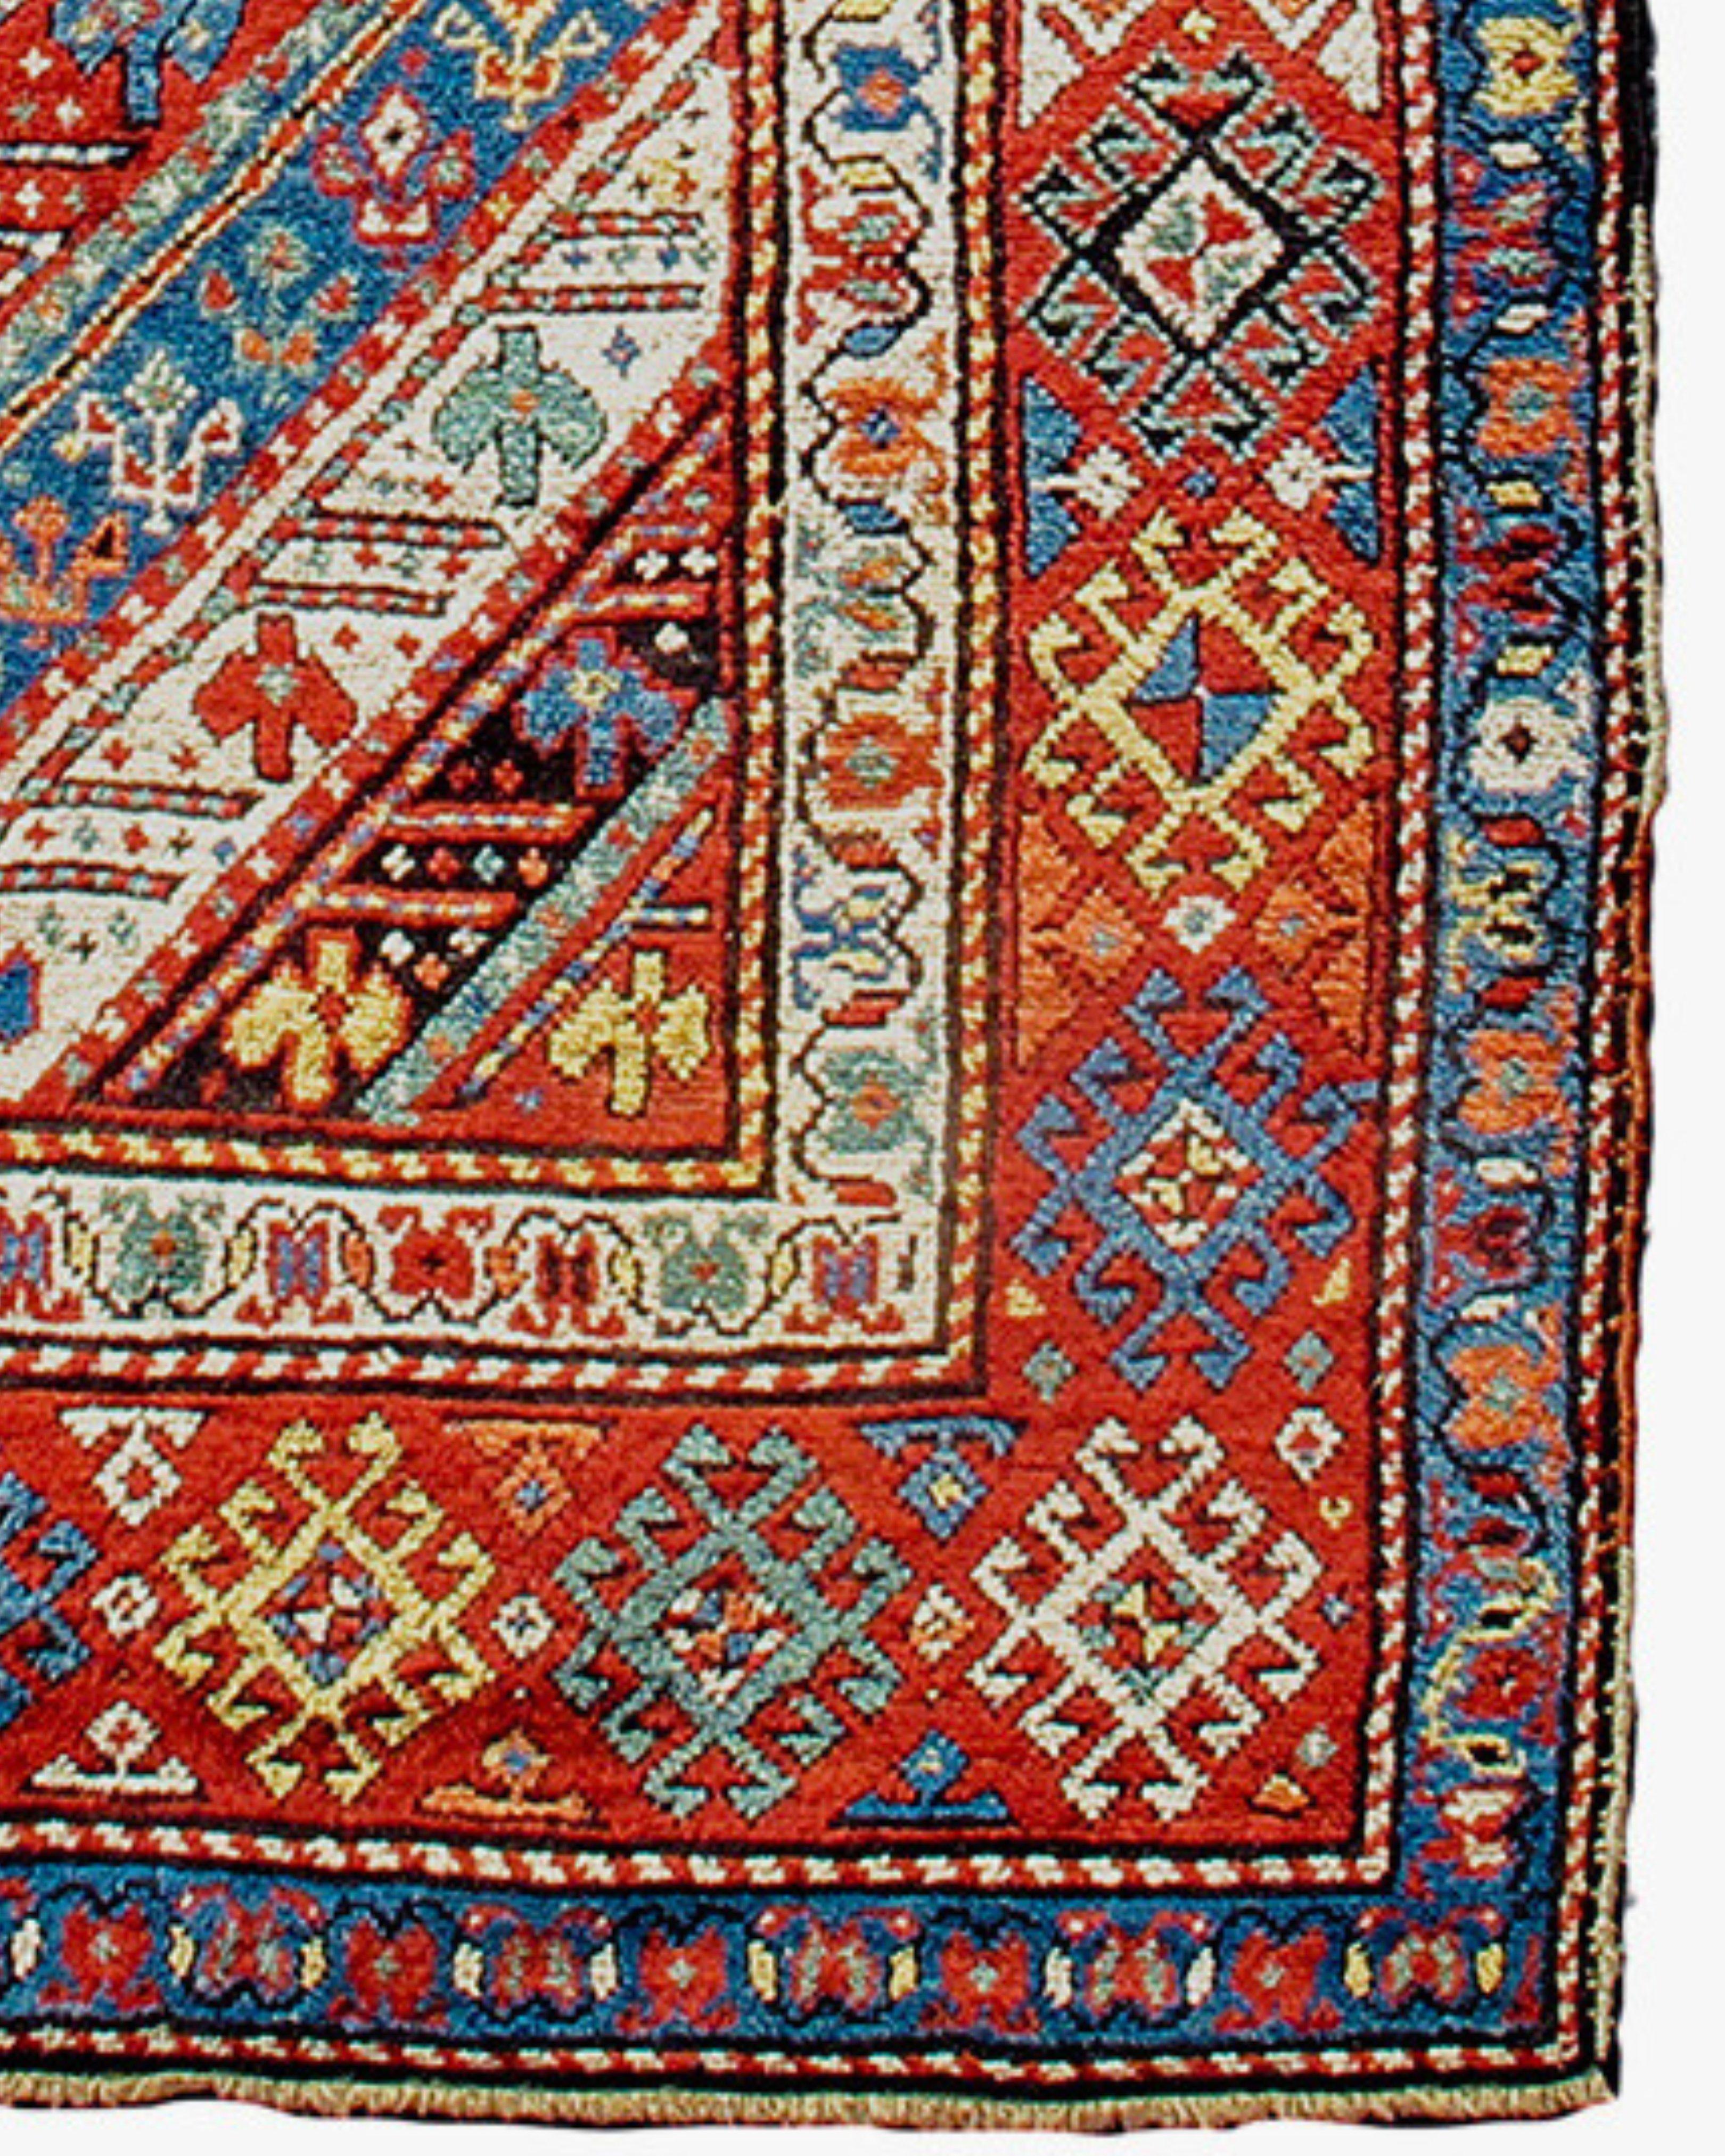 Gendje Rug, Late 19th Century In Excellent Condition For Sale In San Francisco, CA